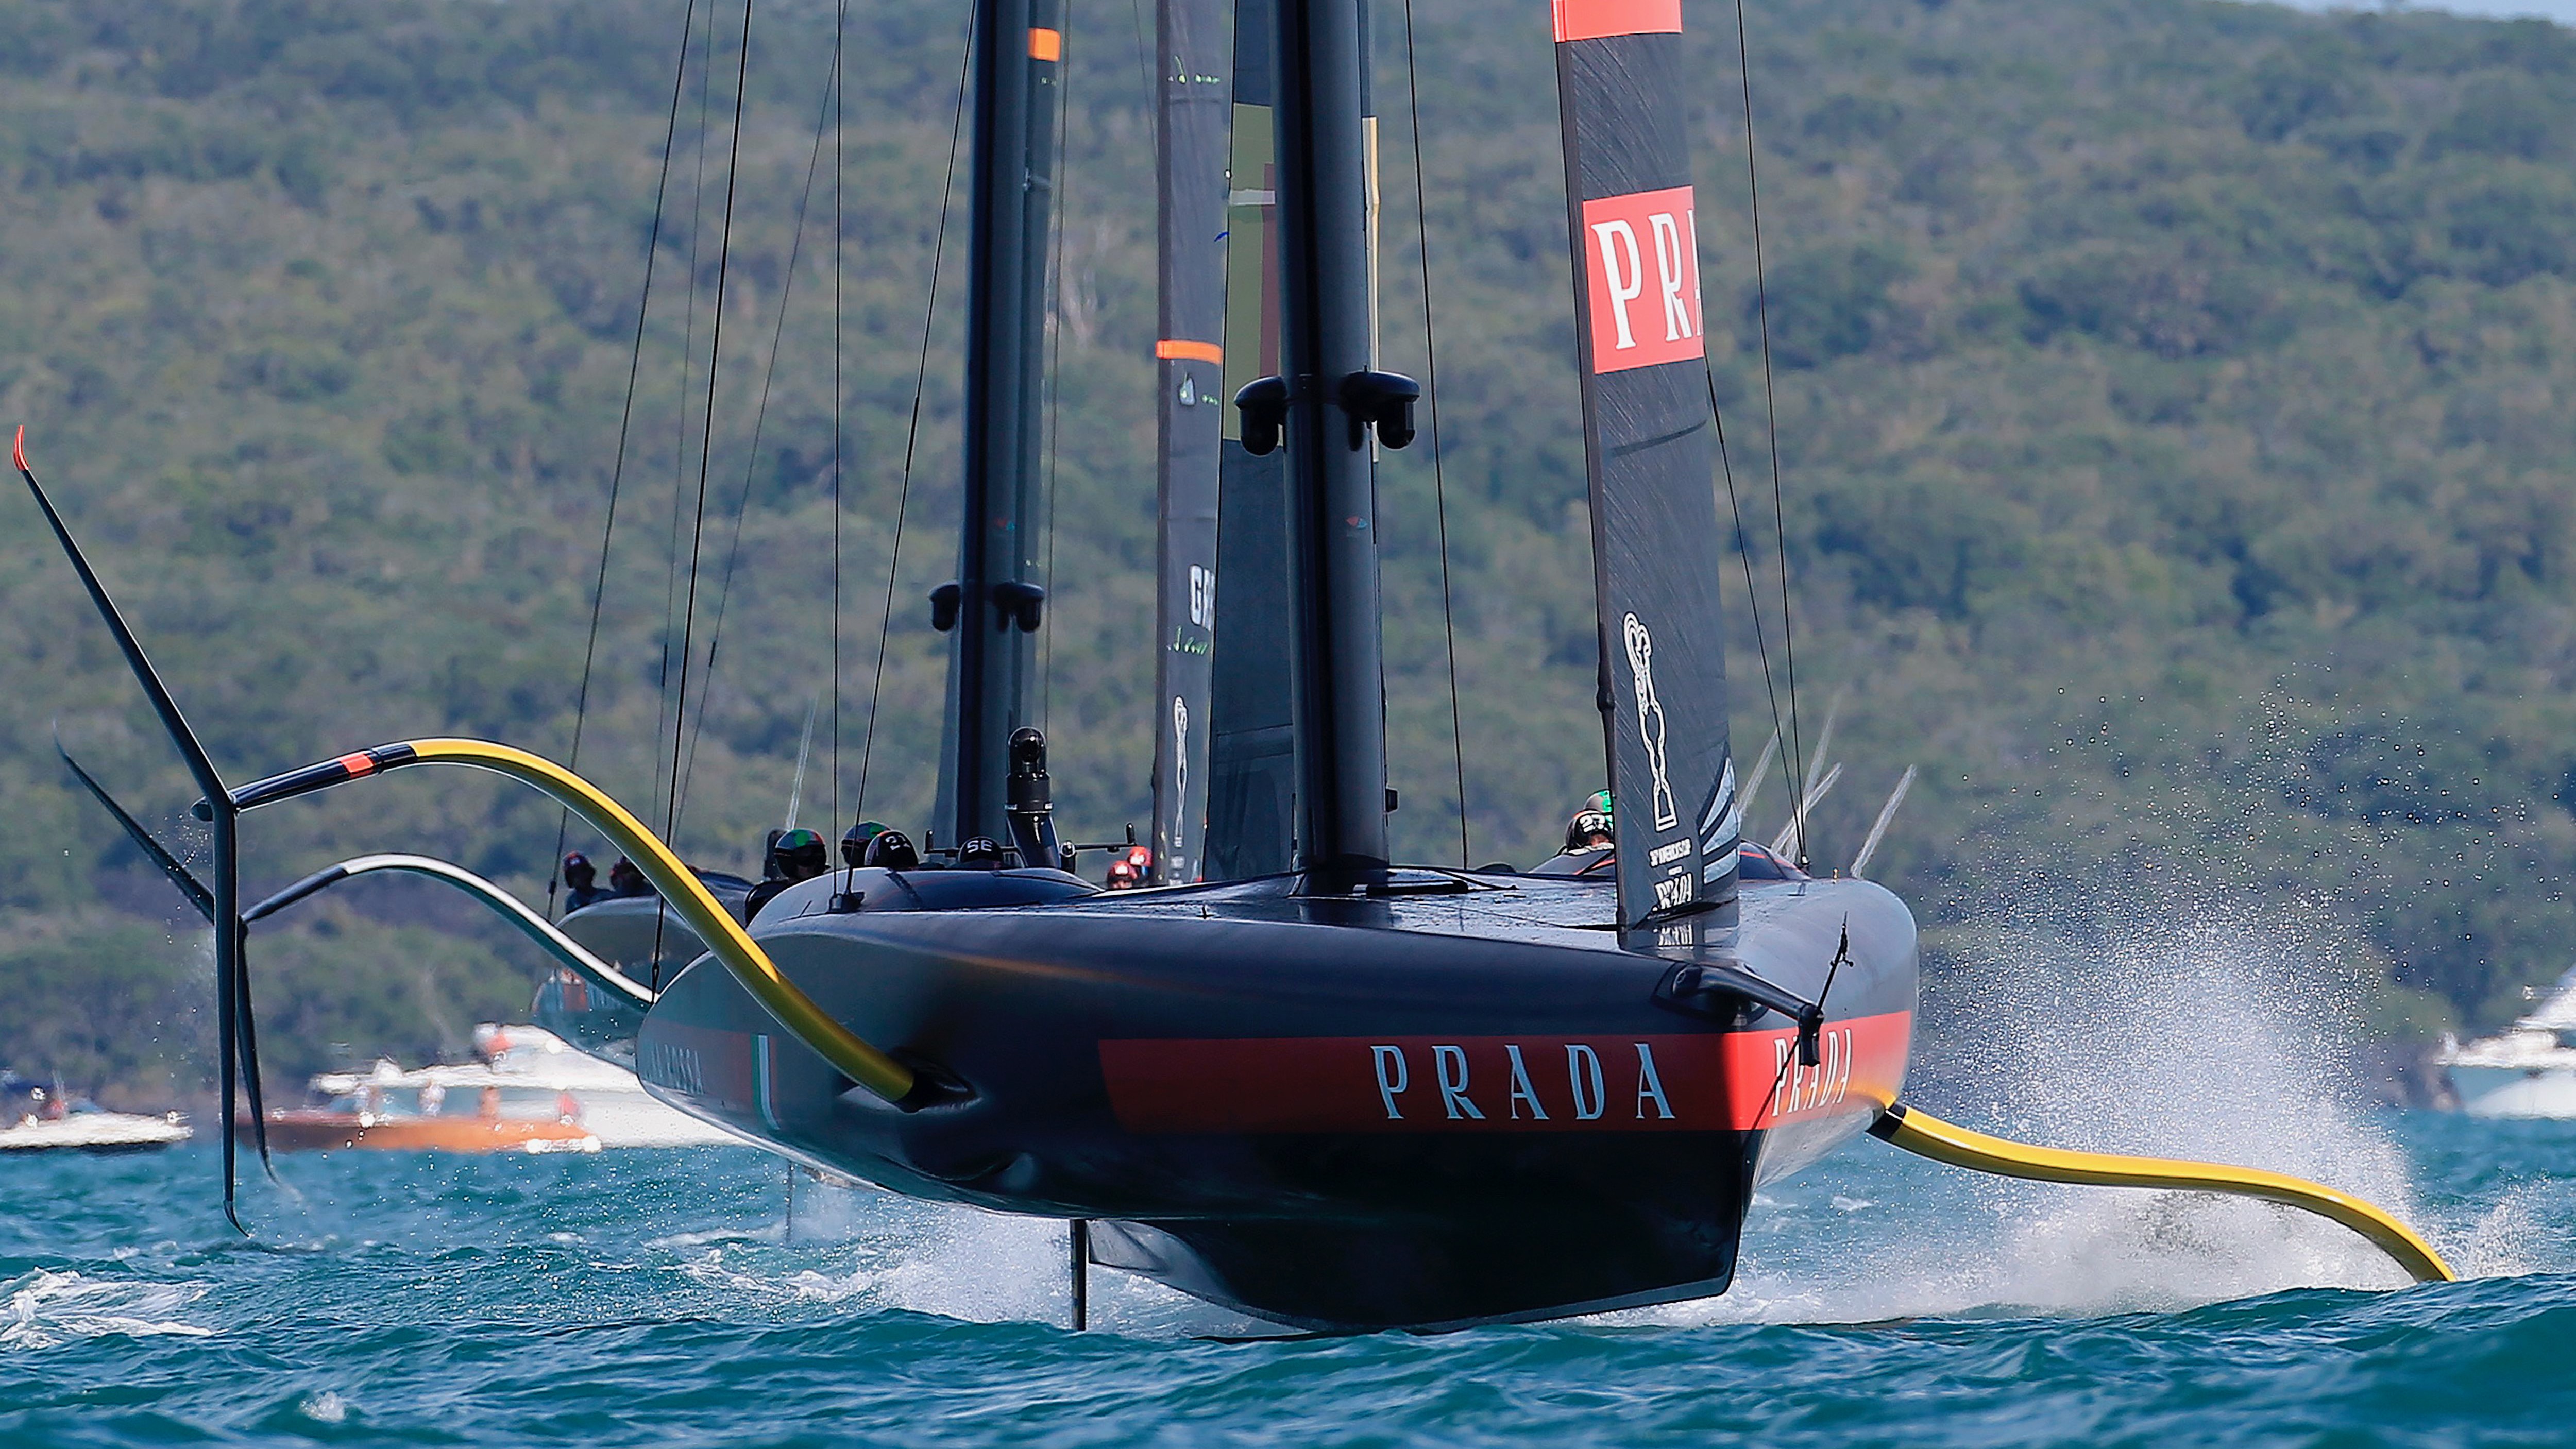 Americas Cup live stream how to watch the final race for free in Australia TechRadar